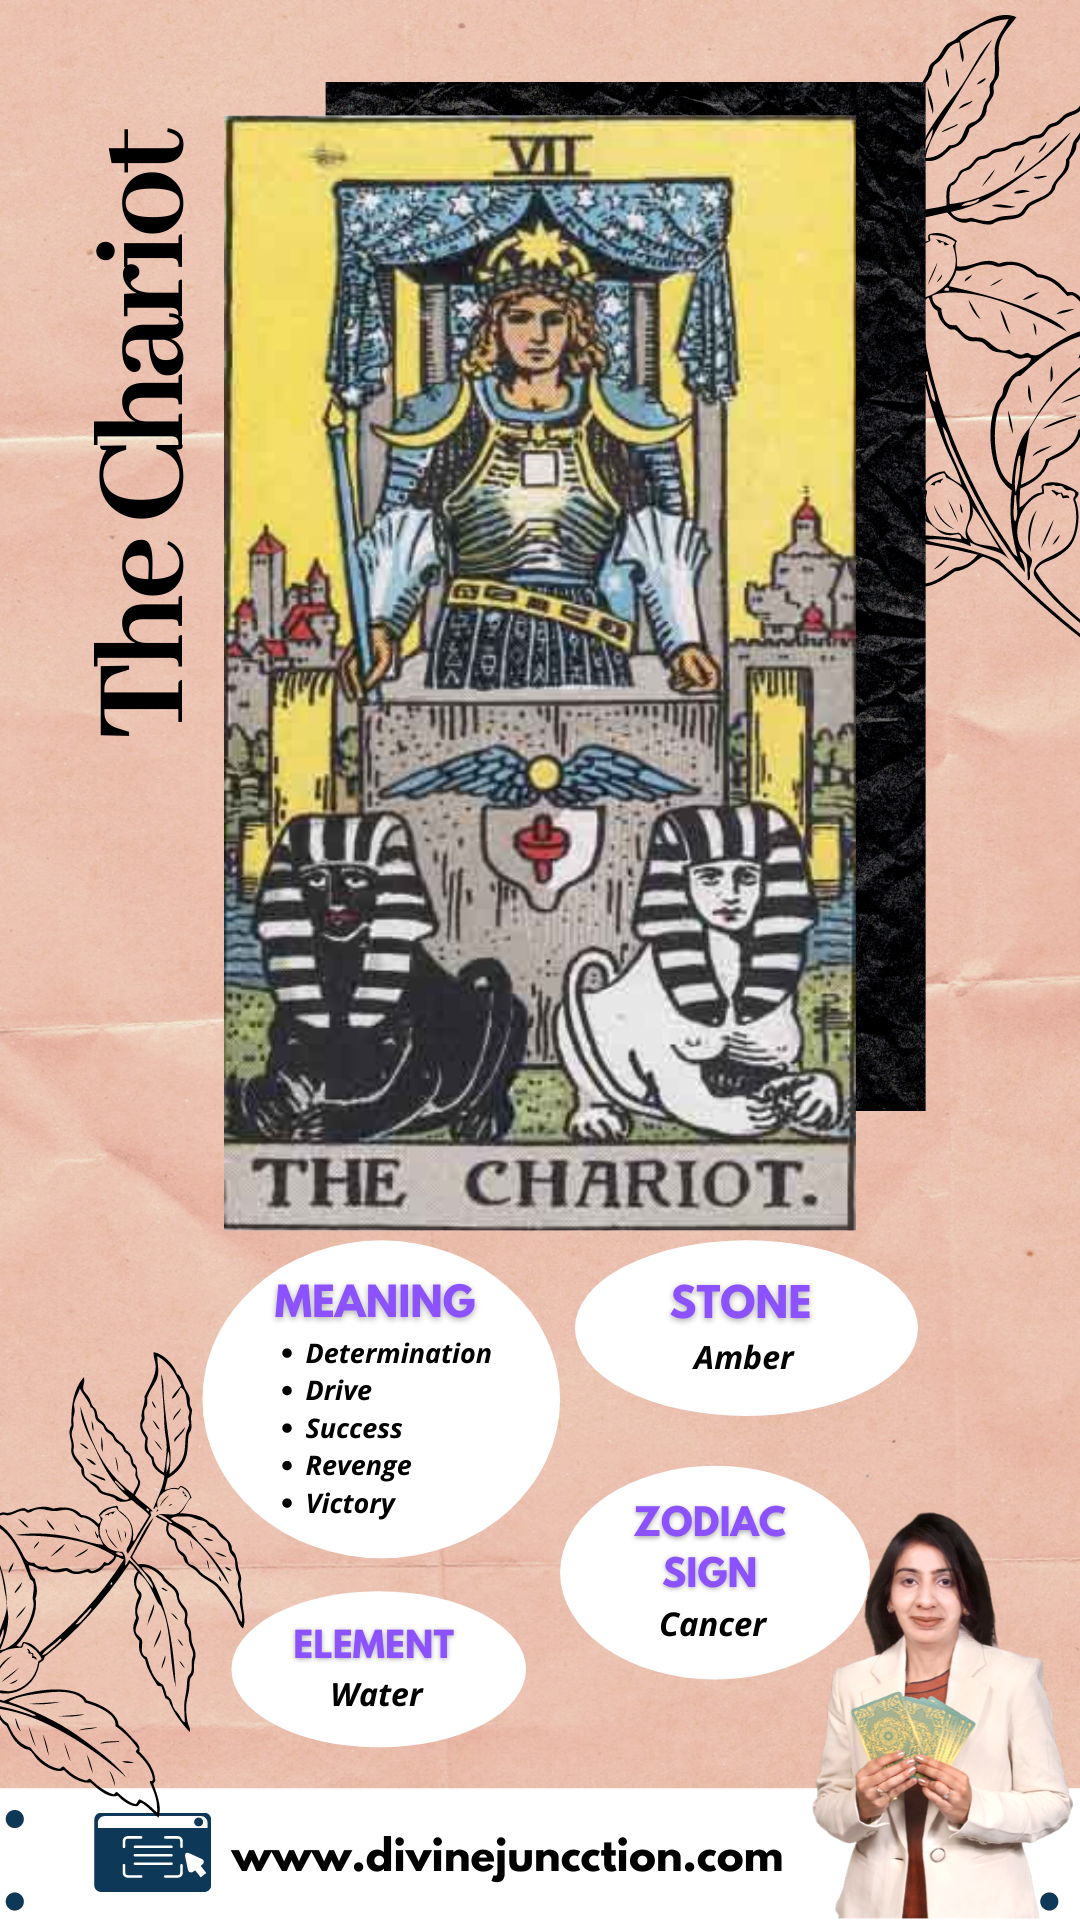 modstand Fancy kjole Indføre Tarot Card Number 7 (The Chariot) - The Ultimate Guide - Divine Juncction